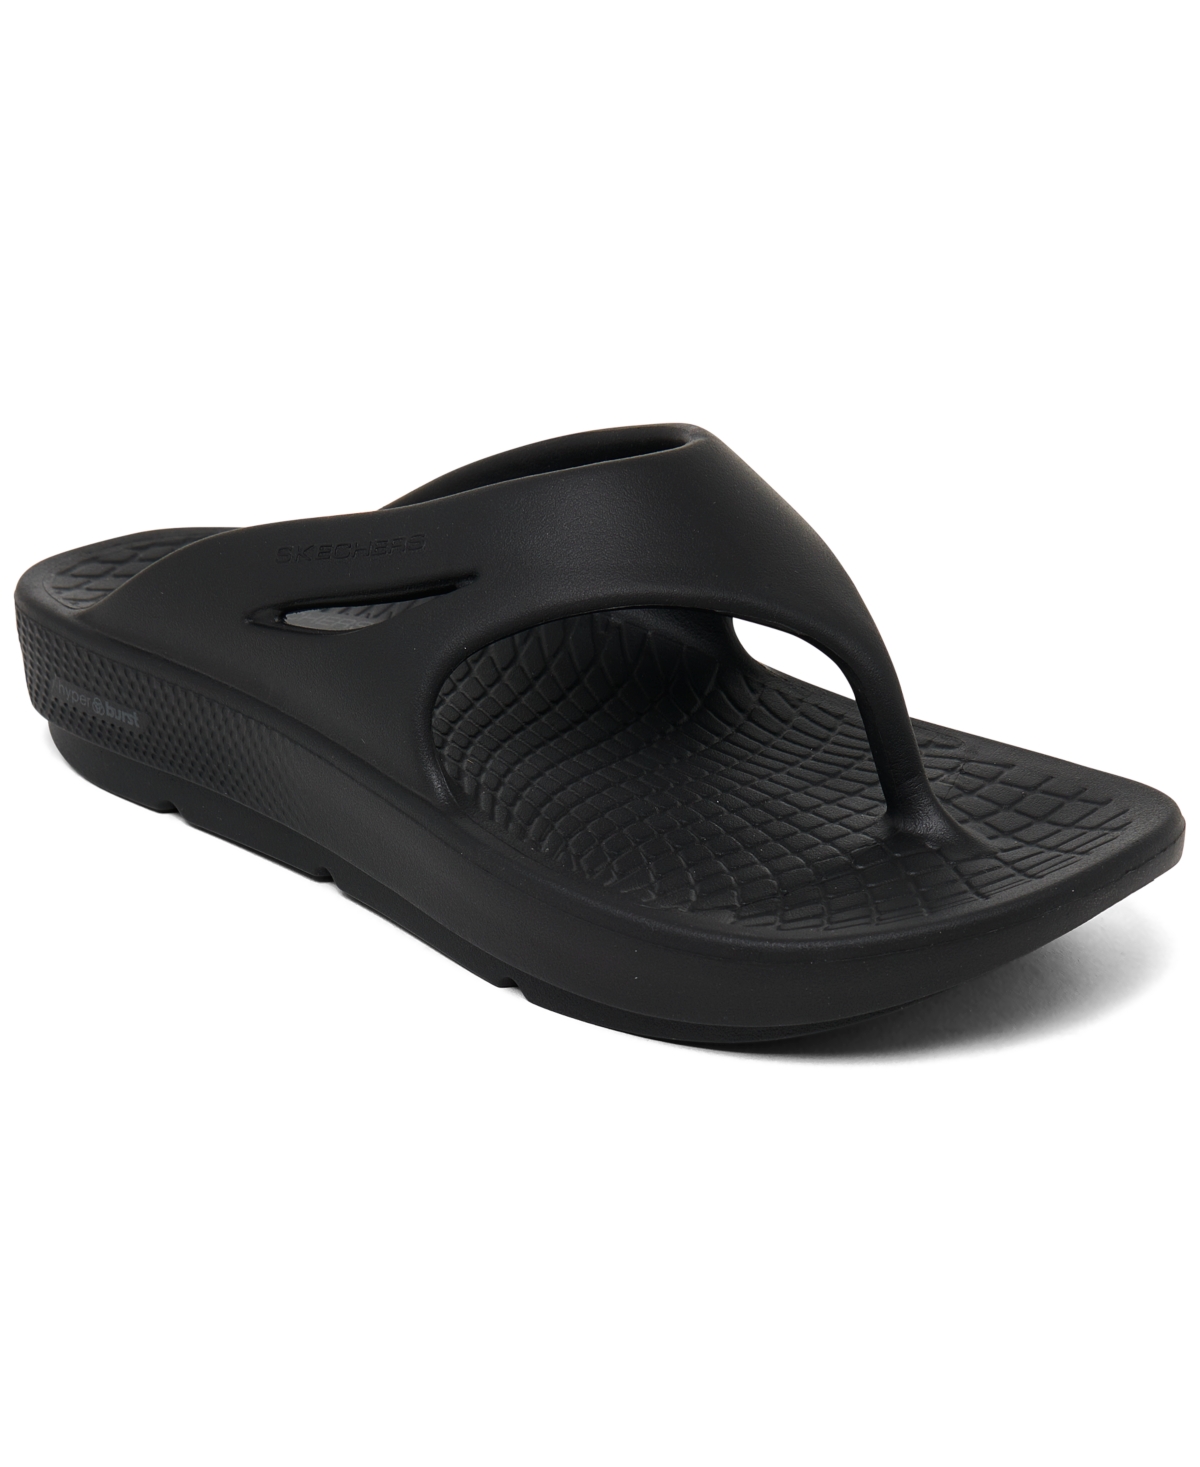 Women's Go Recover Refresh - Contend Slide Sandals from Finish Line - Black